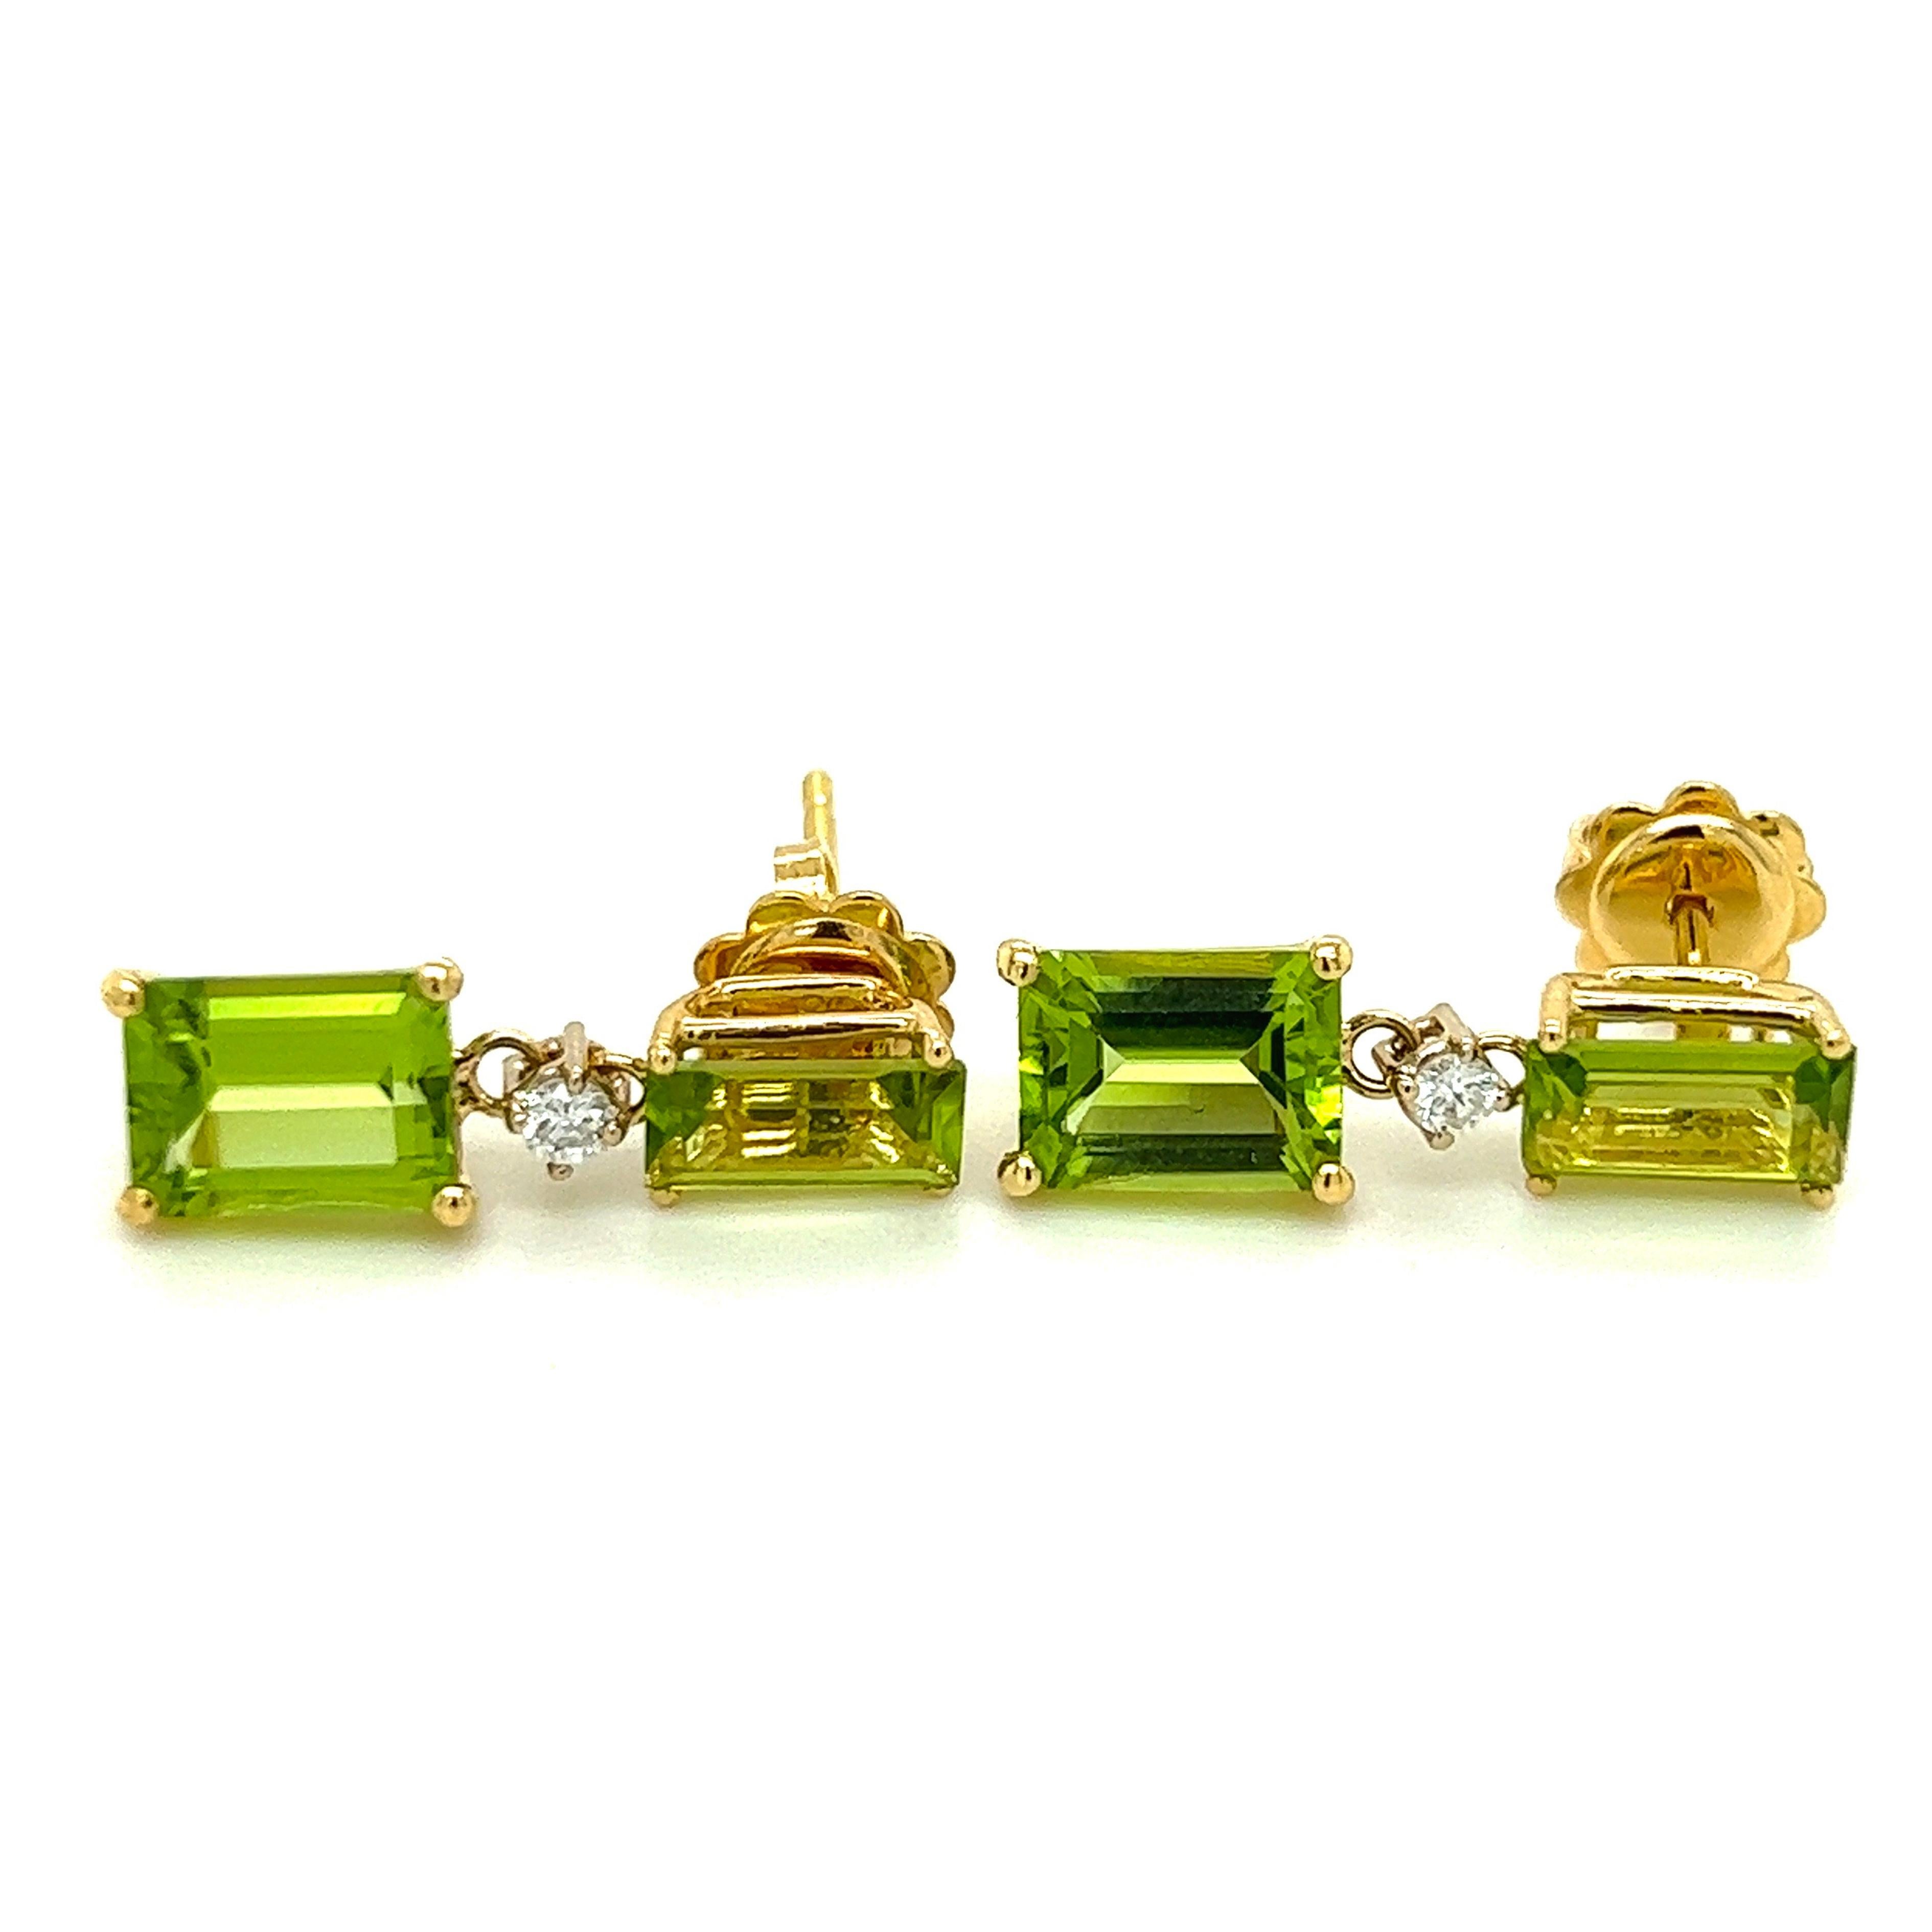 Chic yet timeless  5.10 Carat Natural Peridot Emerald Cut in a 0.10Kt  White Diamond 18KT Carat Yellow Gold Setting.
These top quality stones were carefully hand inlaid in Germany.
In our smart fitted suede leather case and pouch.
Total Lenght 0.905